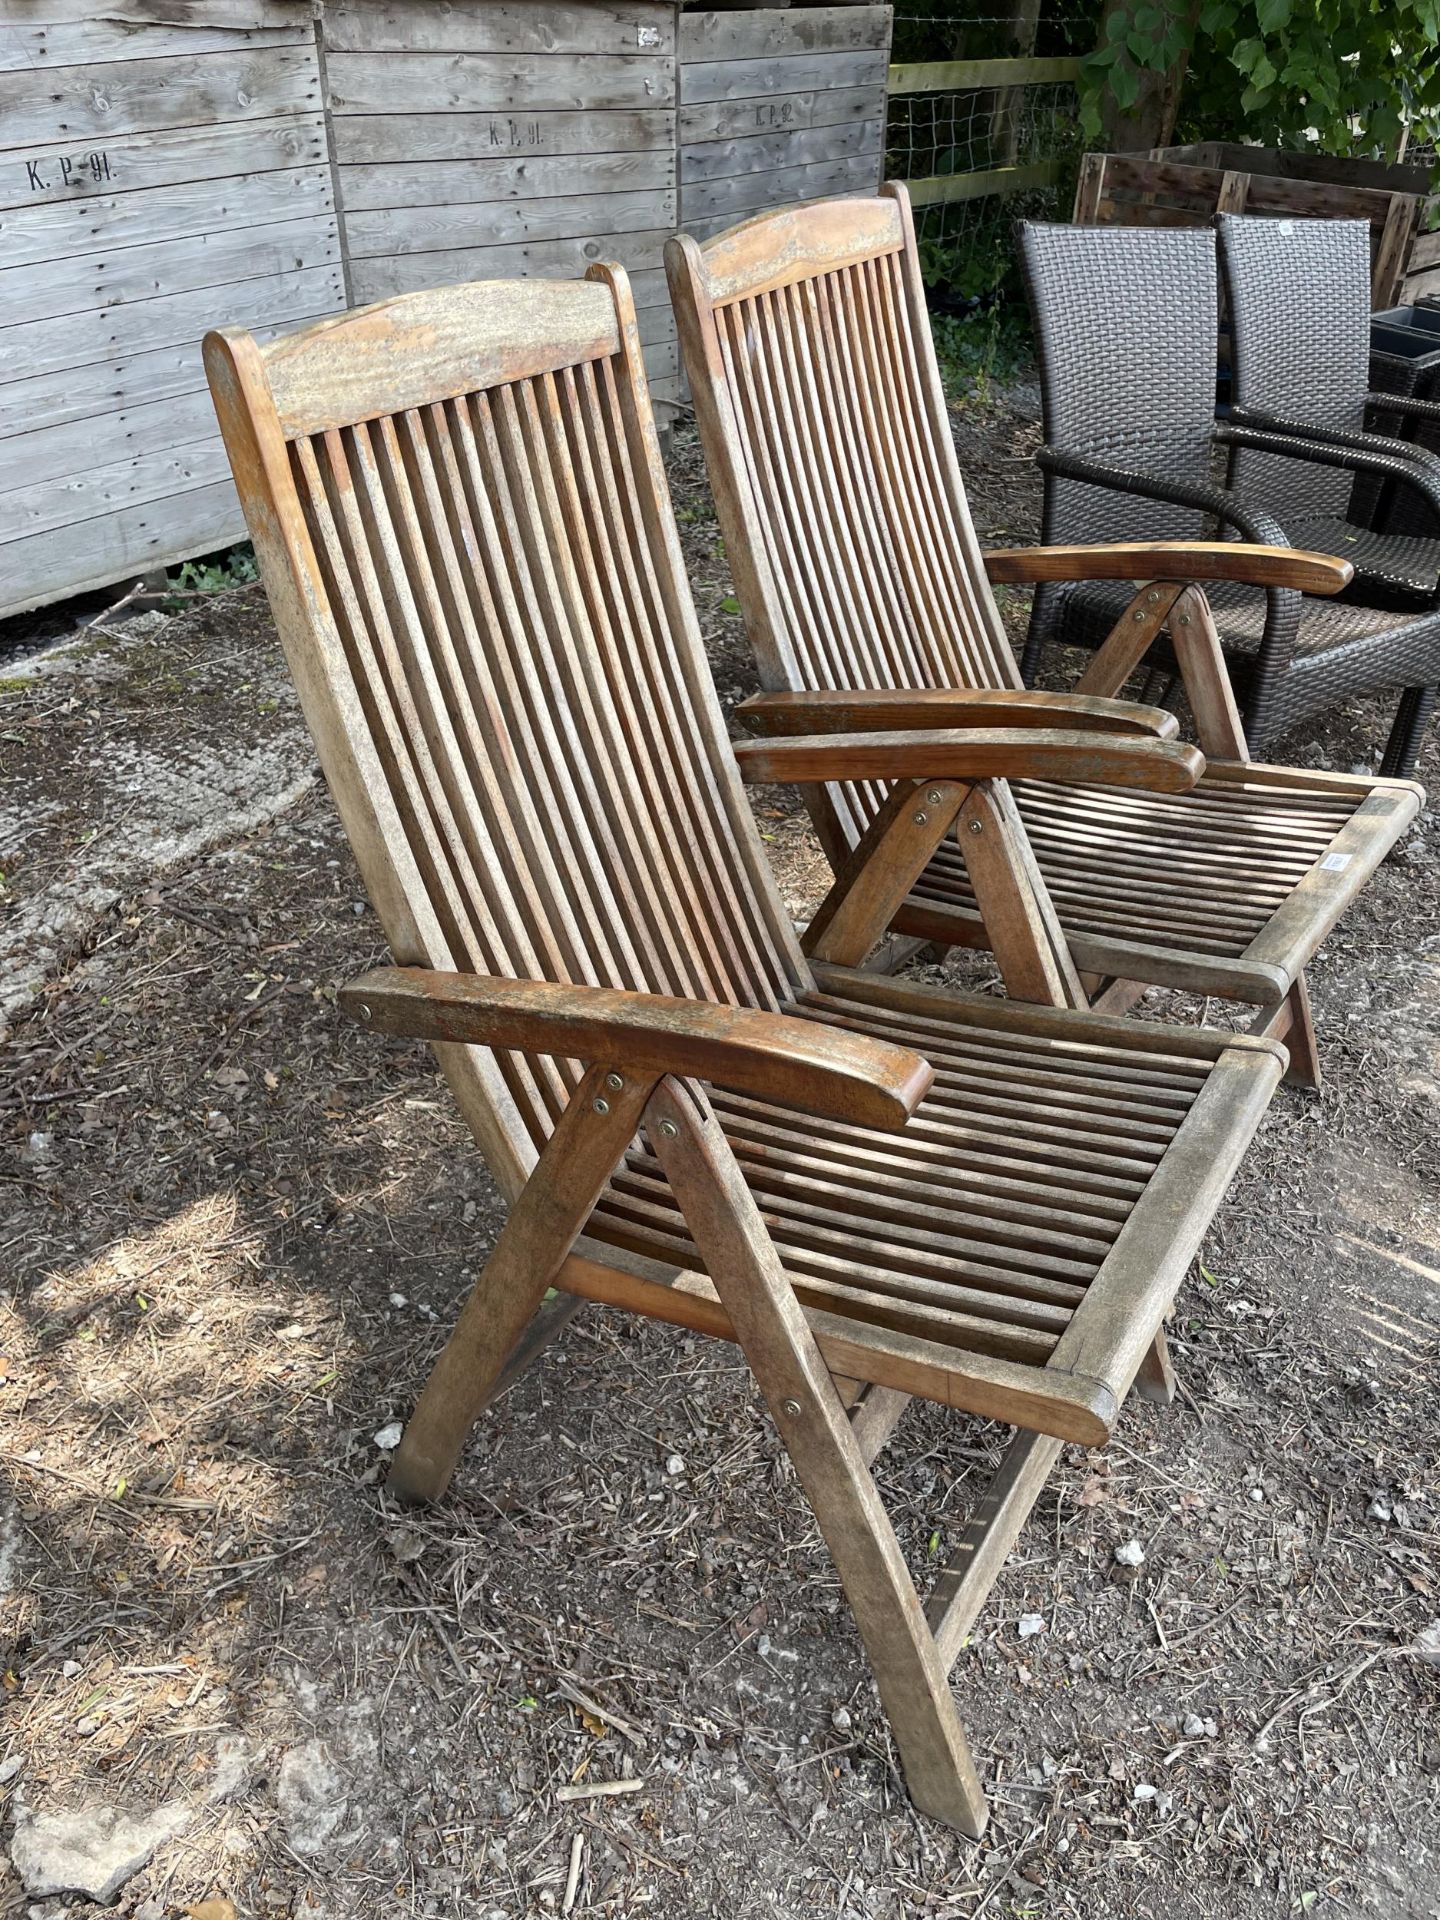 TWO TEAK FOLDING GARDEN CHAIRS - Image 2 of 2